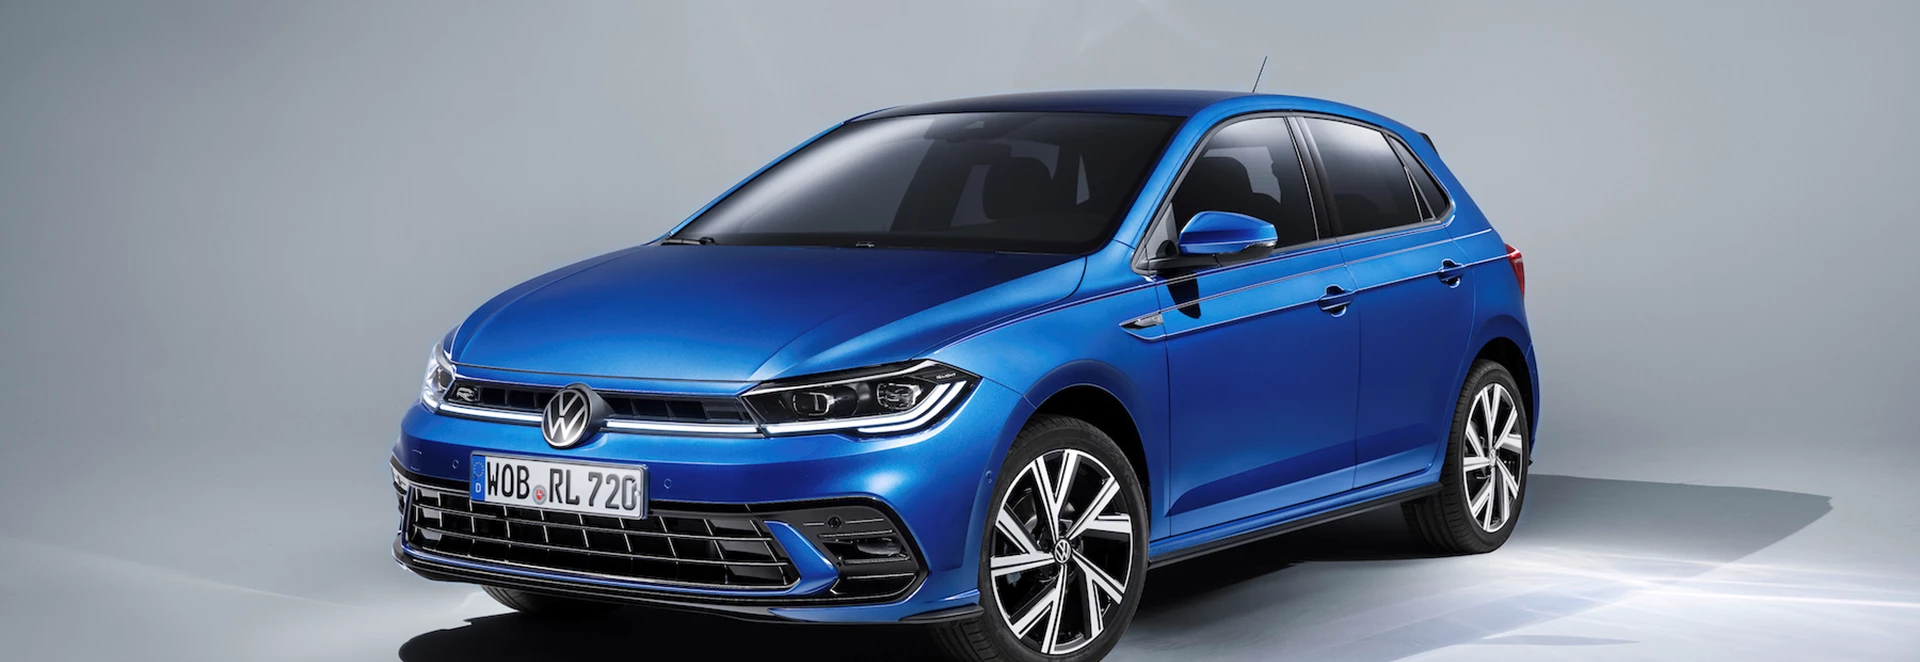 New 2022 Volkswagen Polo: What’s changed? 